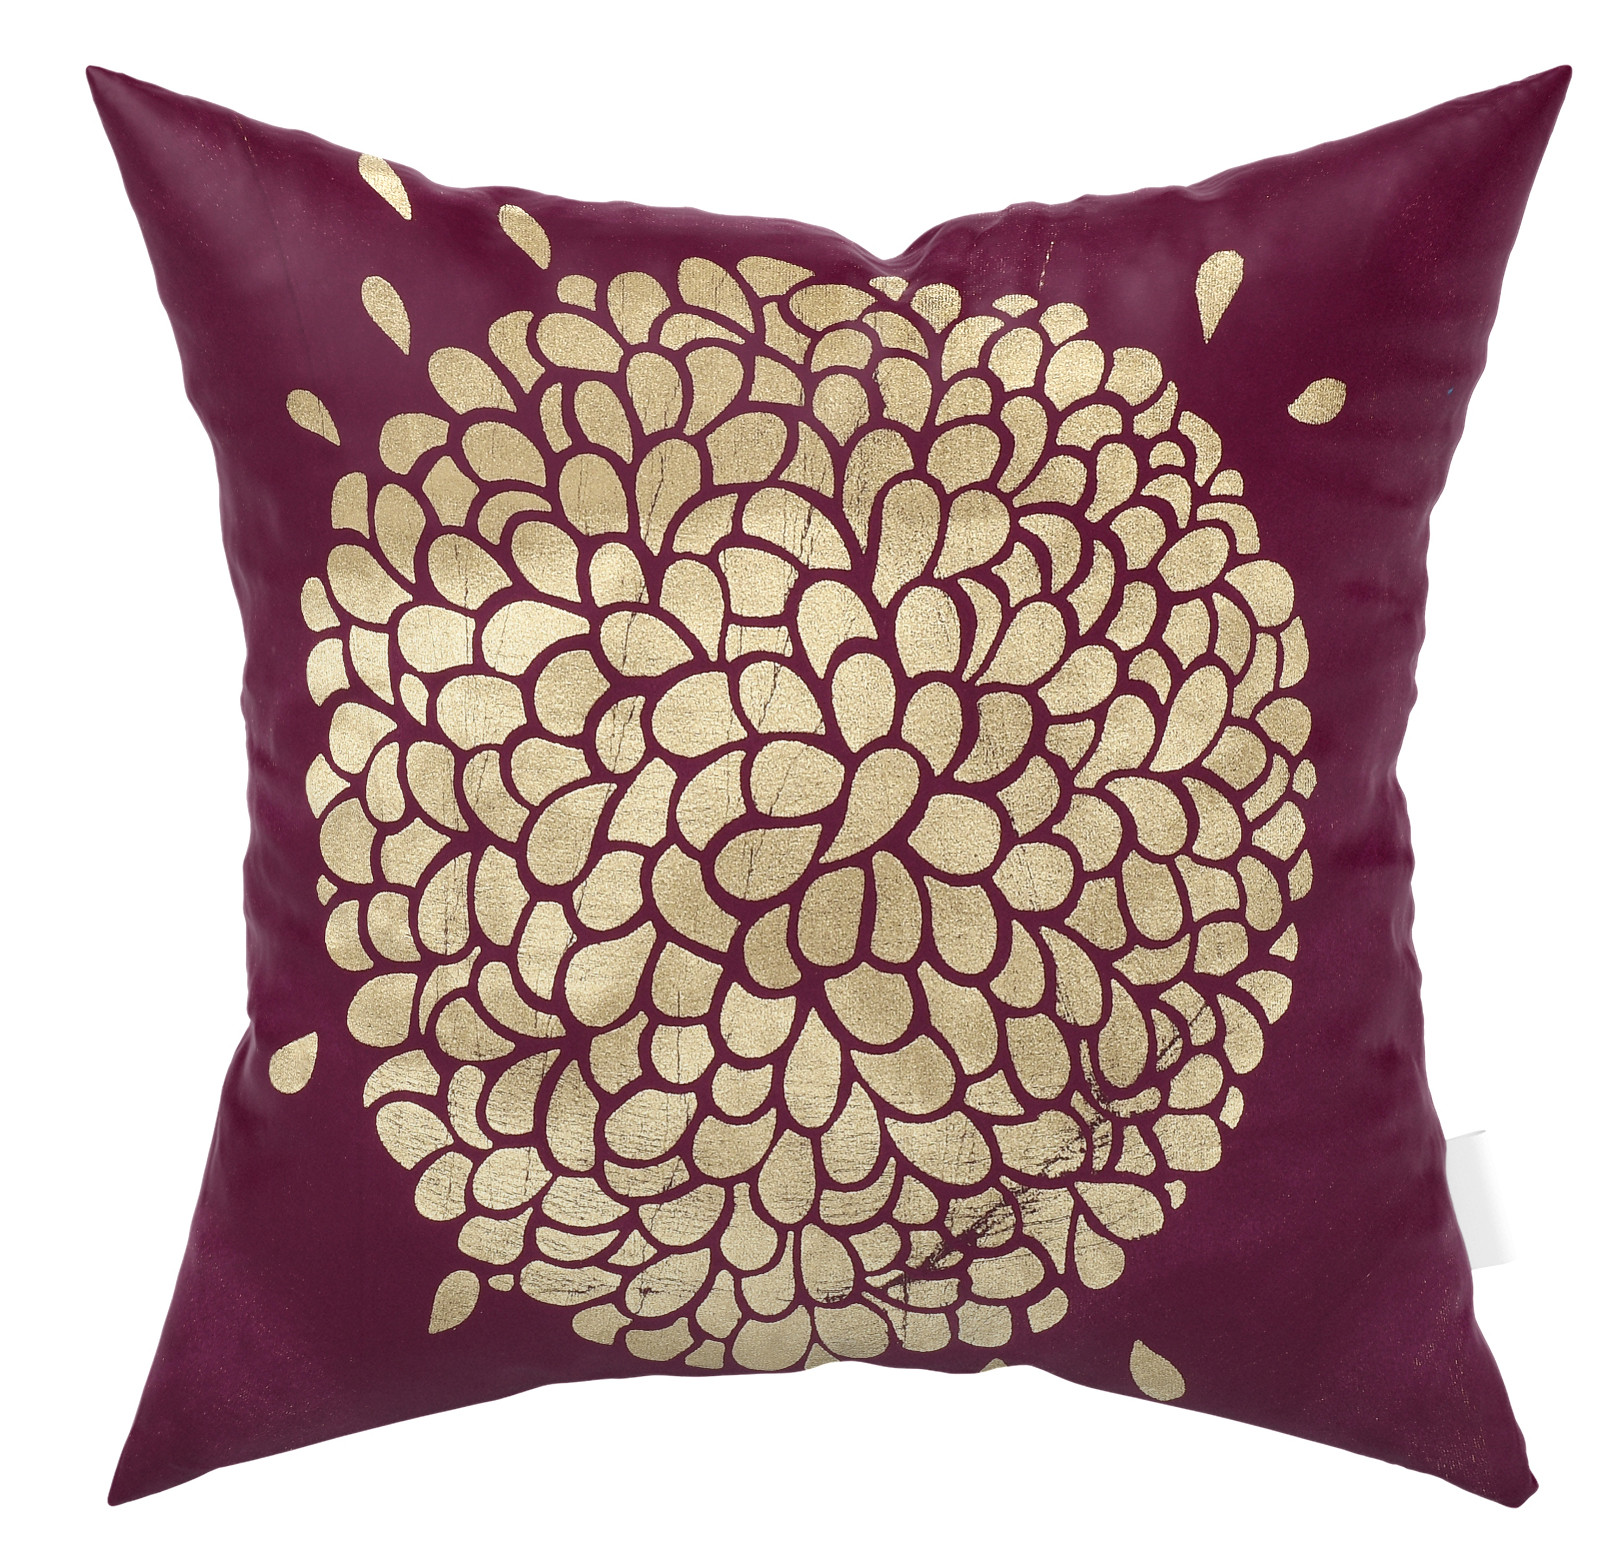 Kuber Industries Velvet Floral Design Soft Decorative Square Throw Pillow Cover, Cushion Covers, Pillow Case For Sofa Couch Bed Chair 16x16 Inch-(Purple)